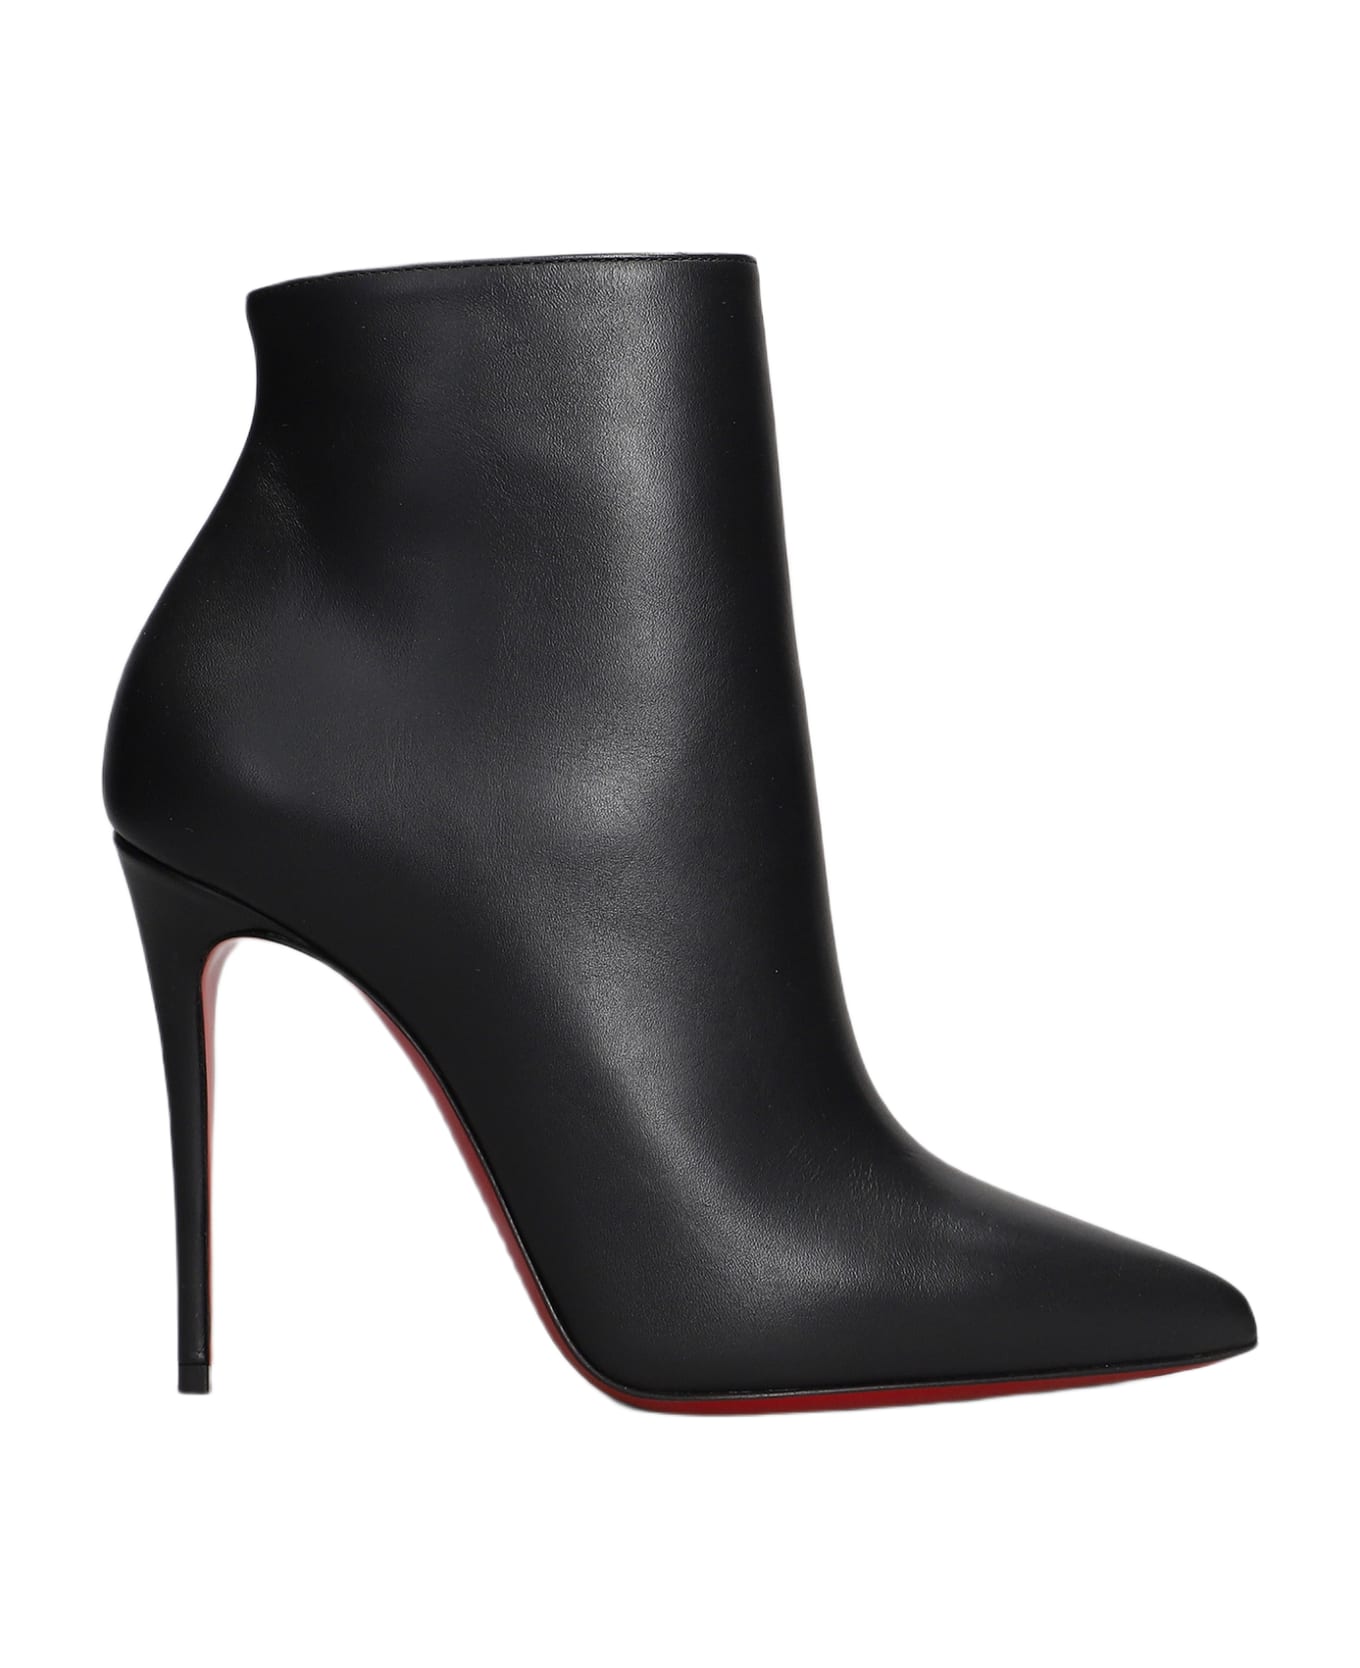 Christian Louboutin So Kate Booty High Heels Ankle Boots In Black Leather - black ブーツ